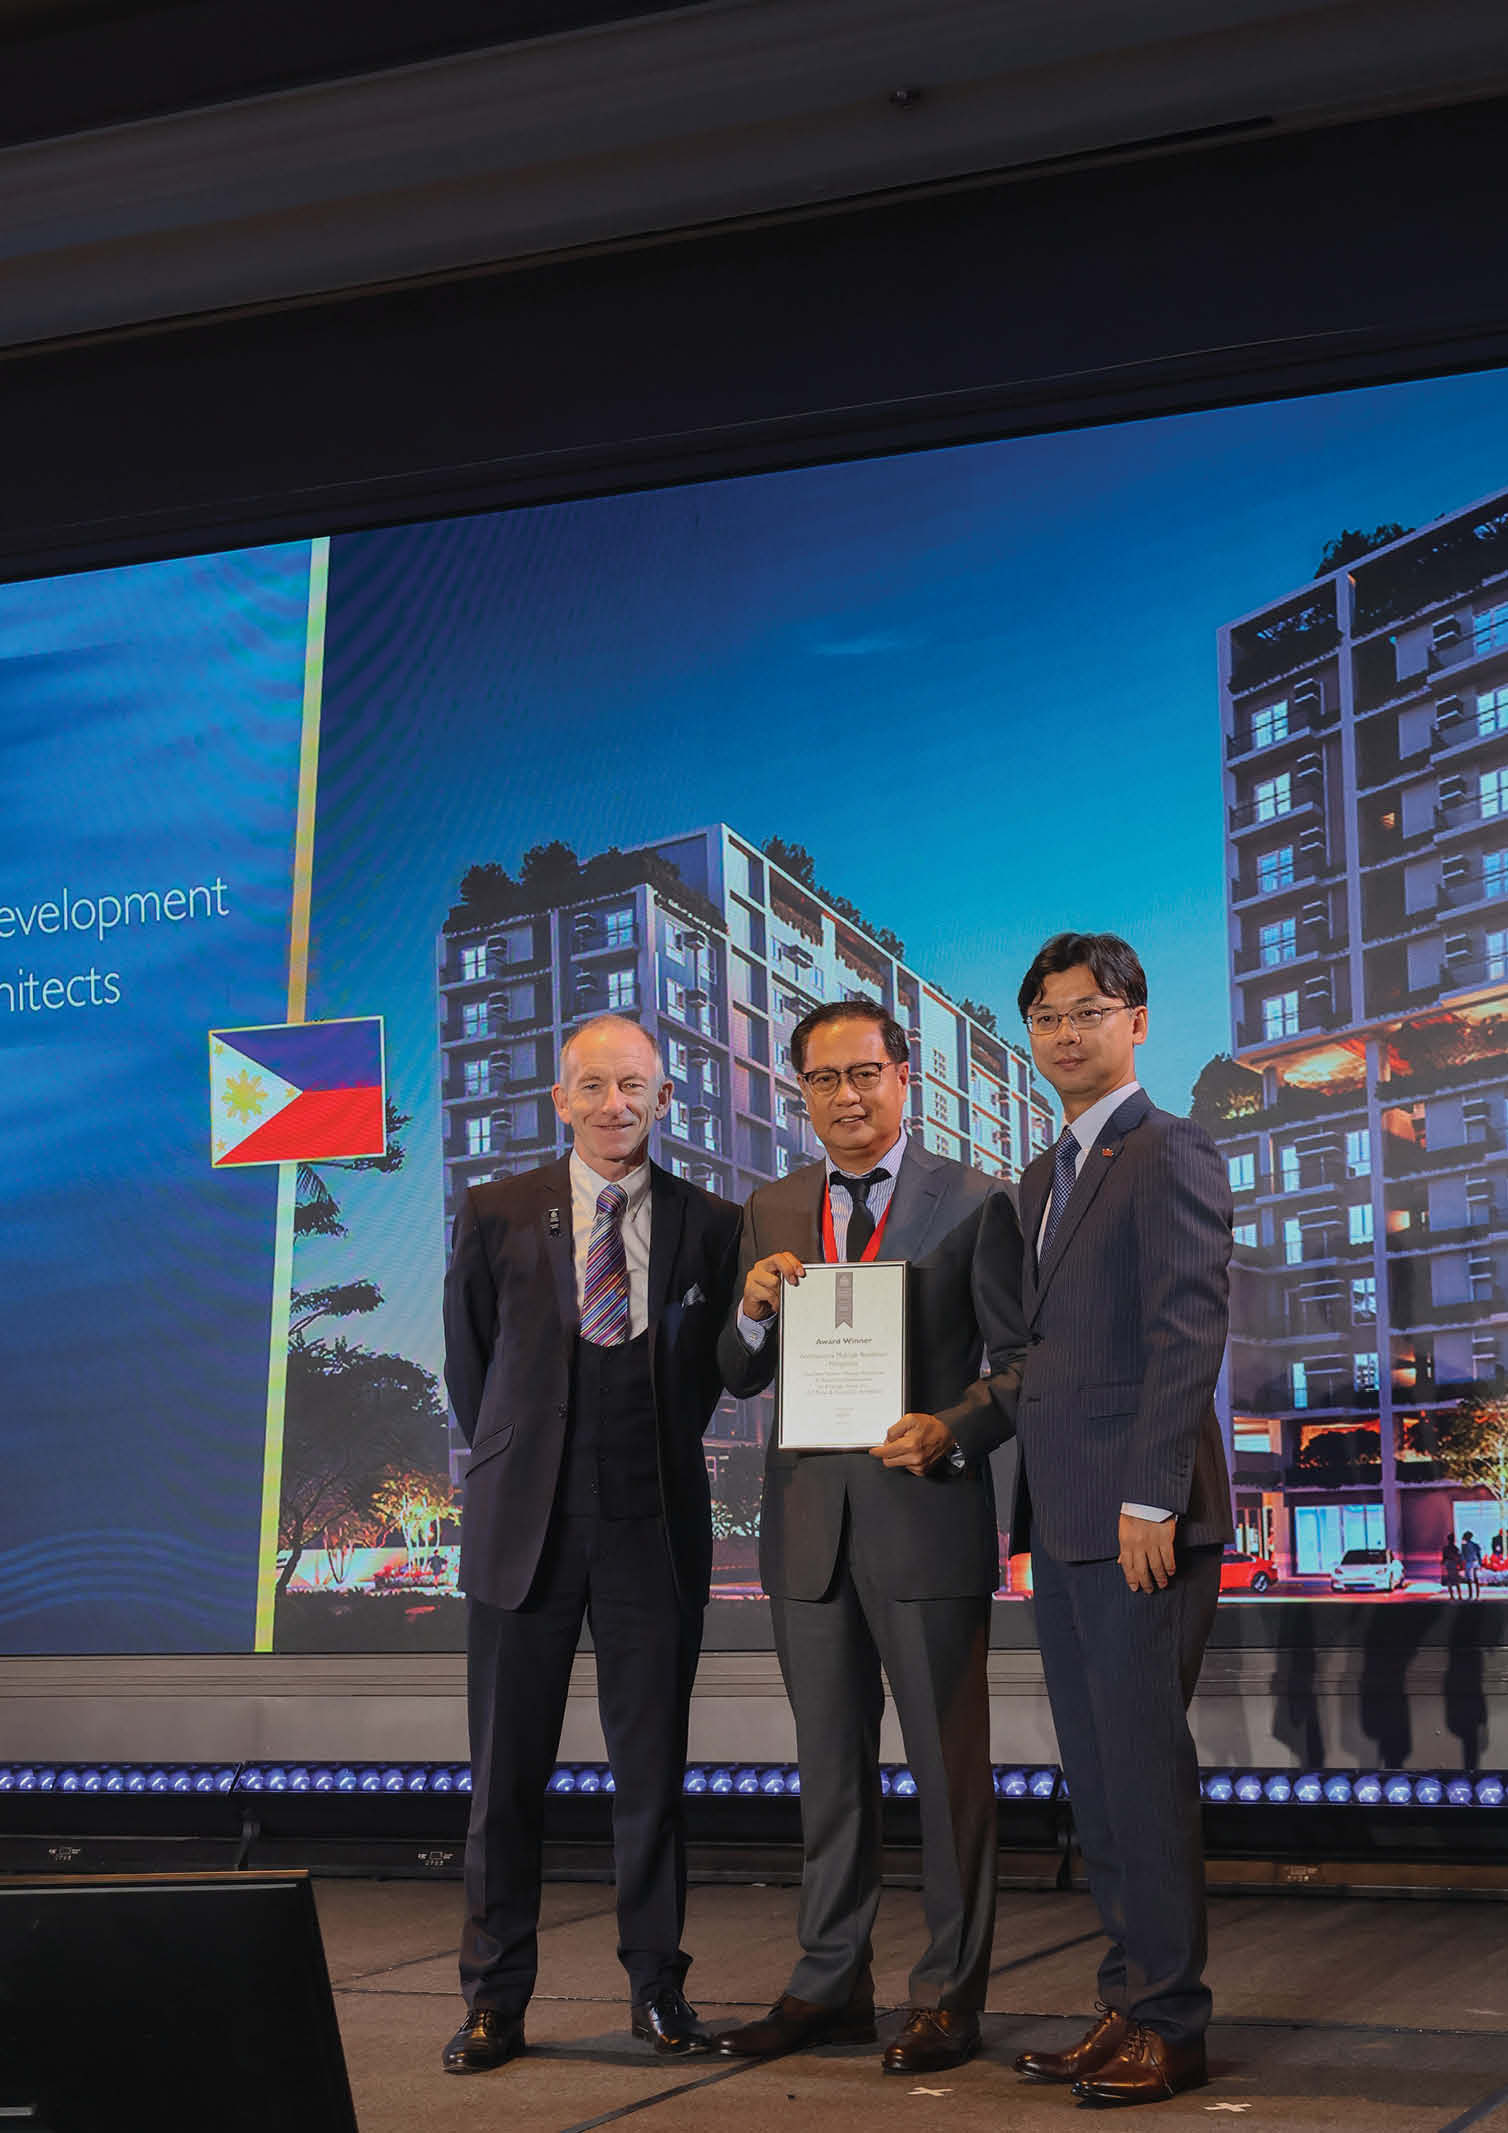 Award Winner for Architecture Multiple Residence
Casa Mira Towers - Palawan Residential & Mixed-Use Development by A Design Group, Inc / L.P. Pariñas & Associates - Architects